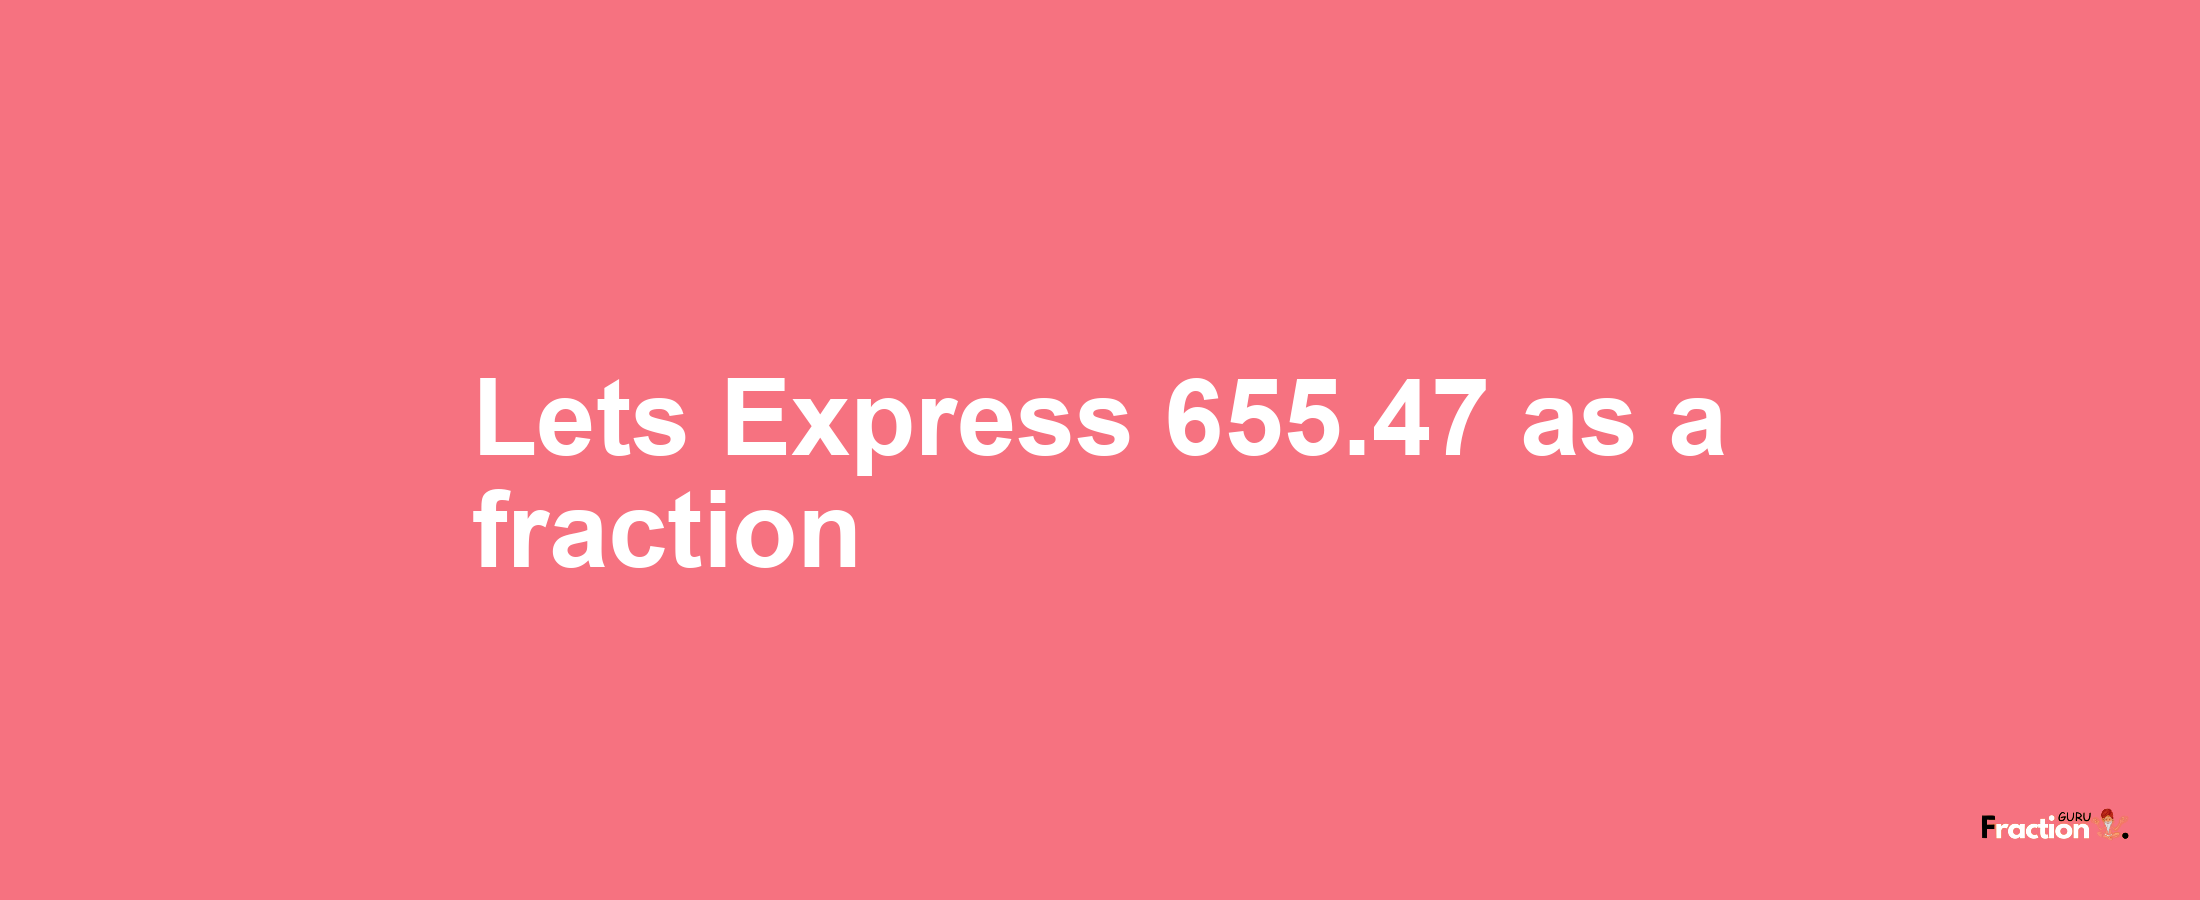 Lets Express 655.47 as afraction